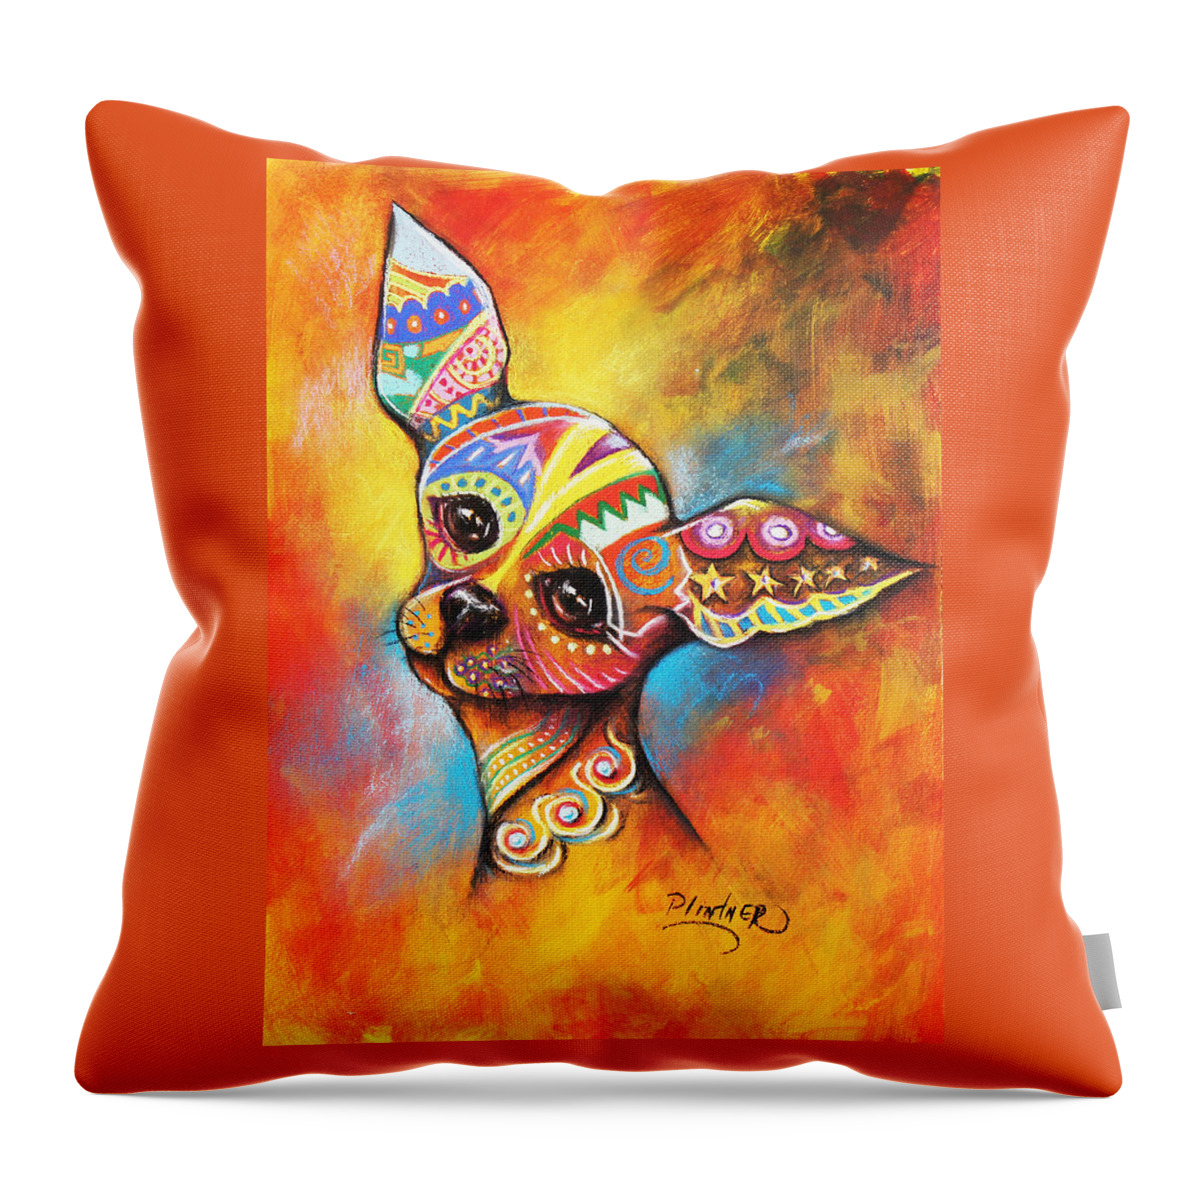 Chihuahua Art Print Throw Pillow featuring the mixed media Chihuahua by Patricia Lintner